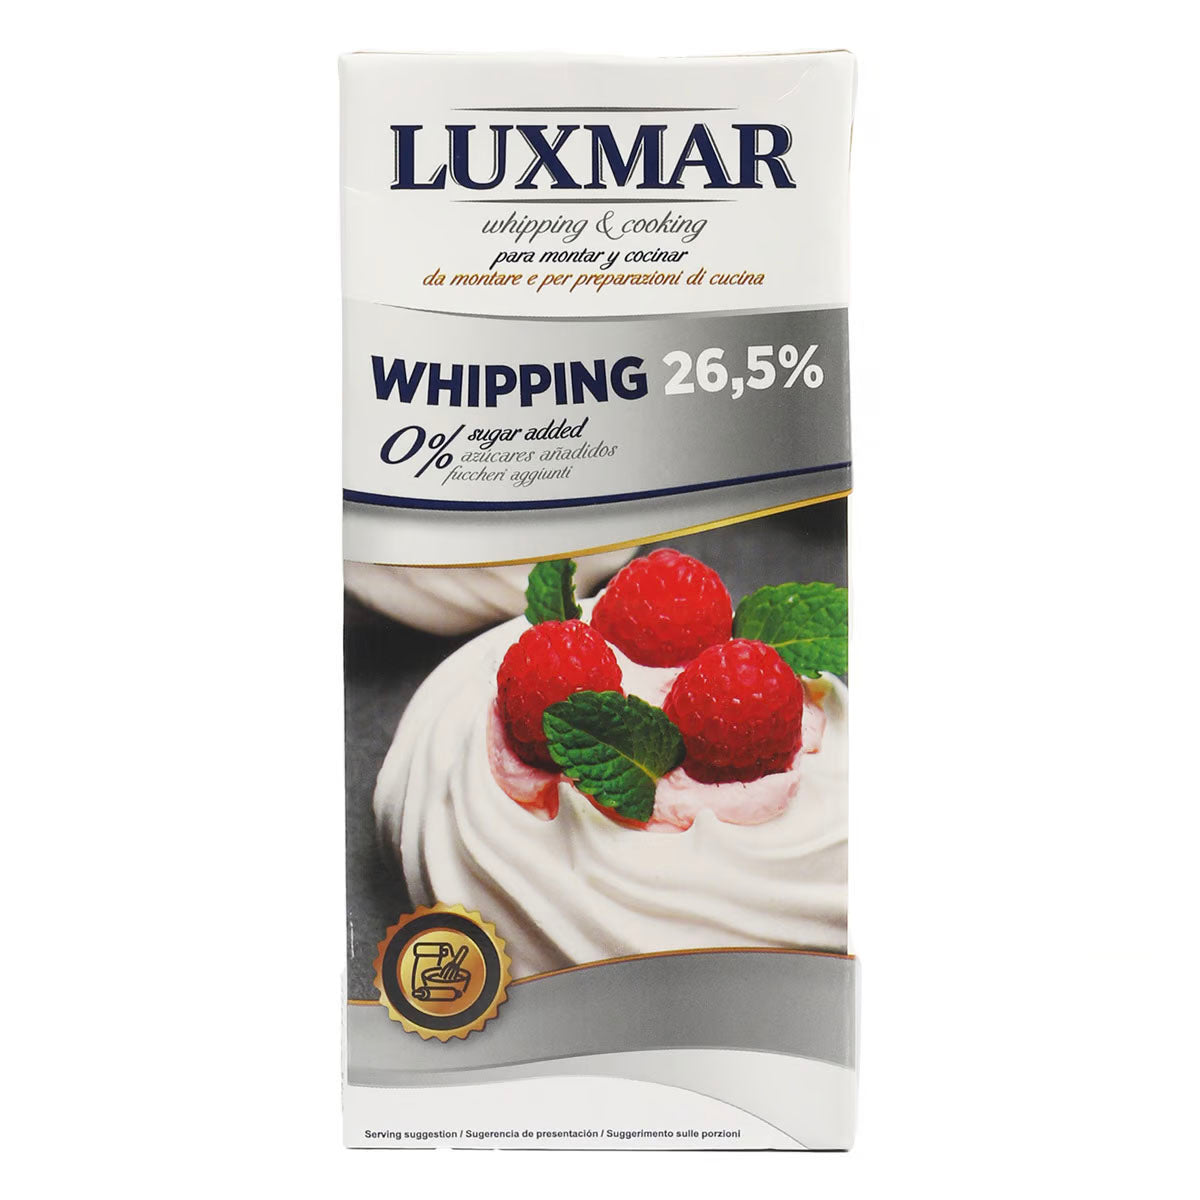 Luxmar Whipping & Cooking Cream 26,5% No Sugar 1L (Chilled)